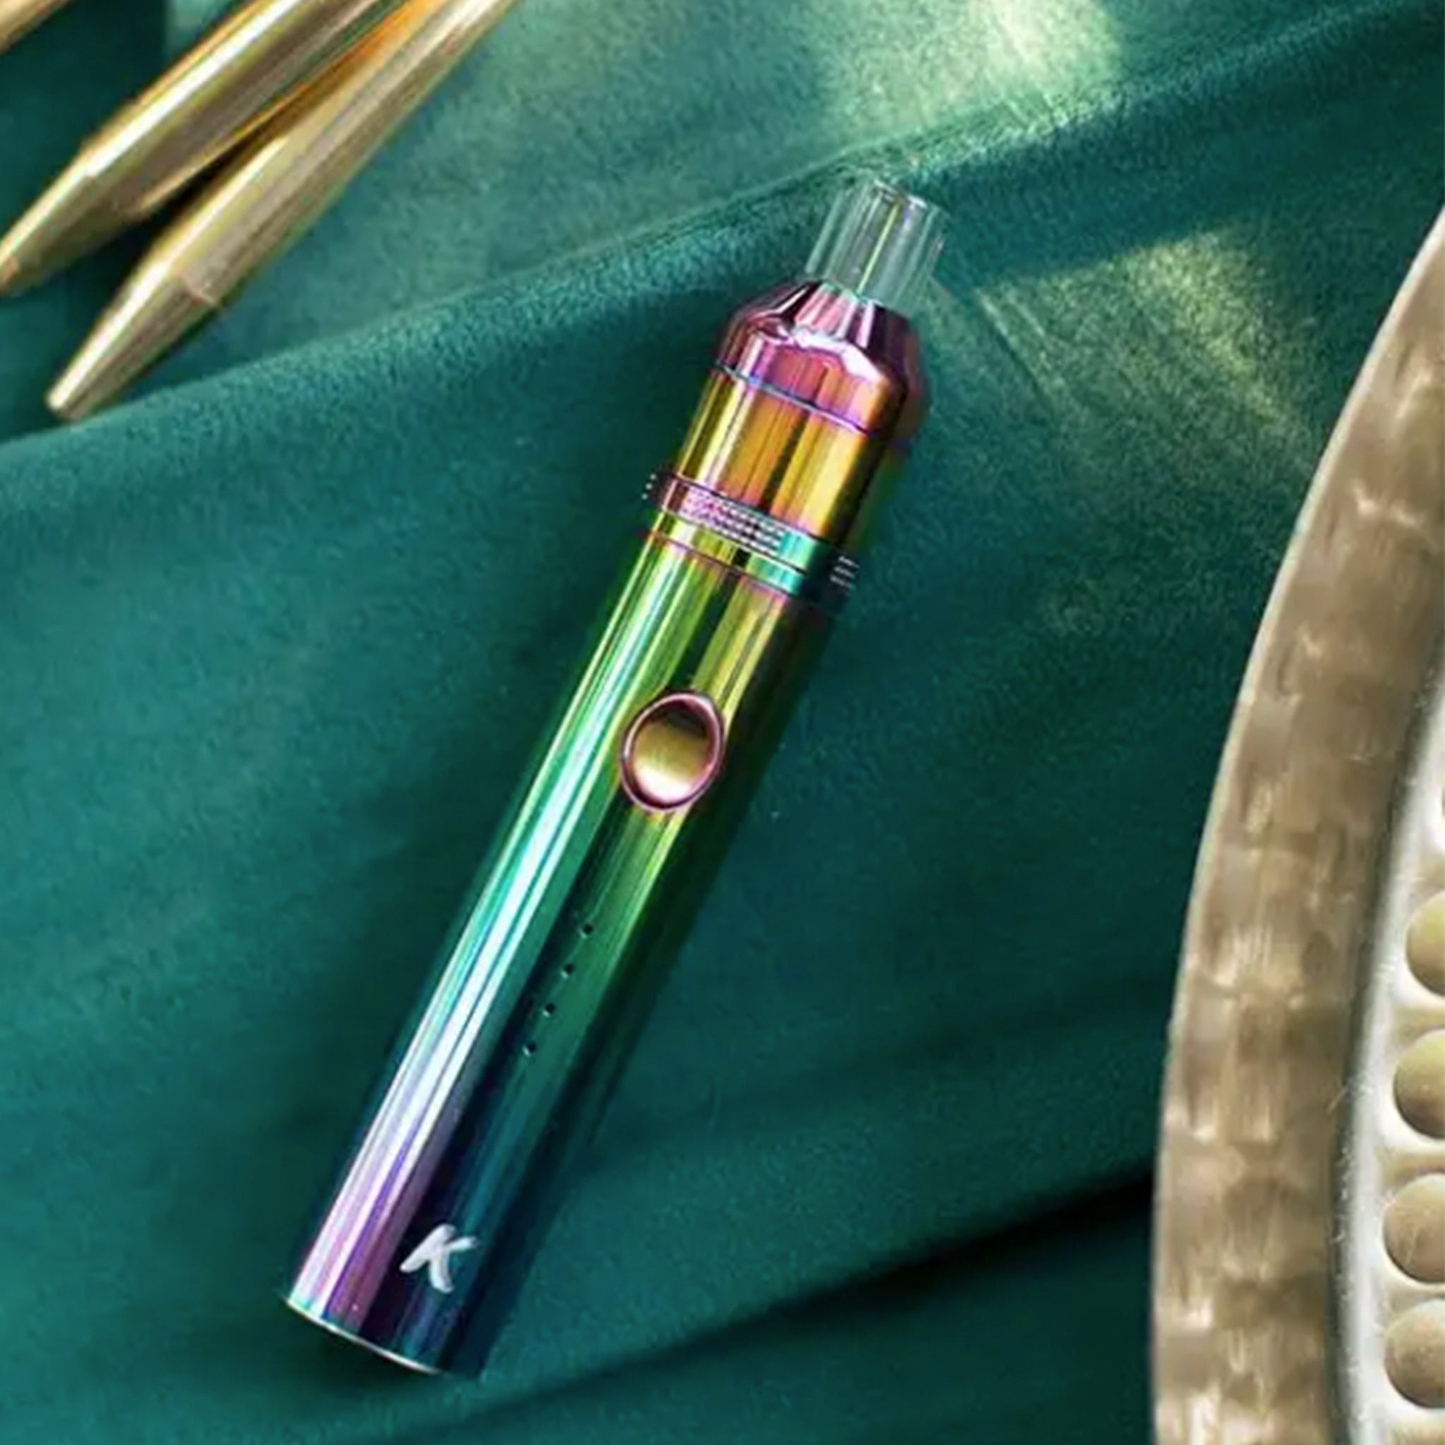 Crystal - 2 - Stainless - Steel - Dab Pen for Concentrates - Ultra-Compact  Design